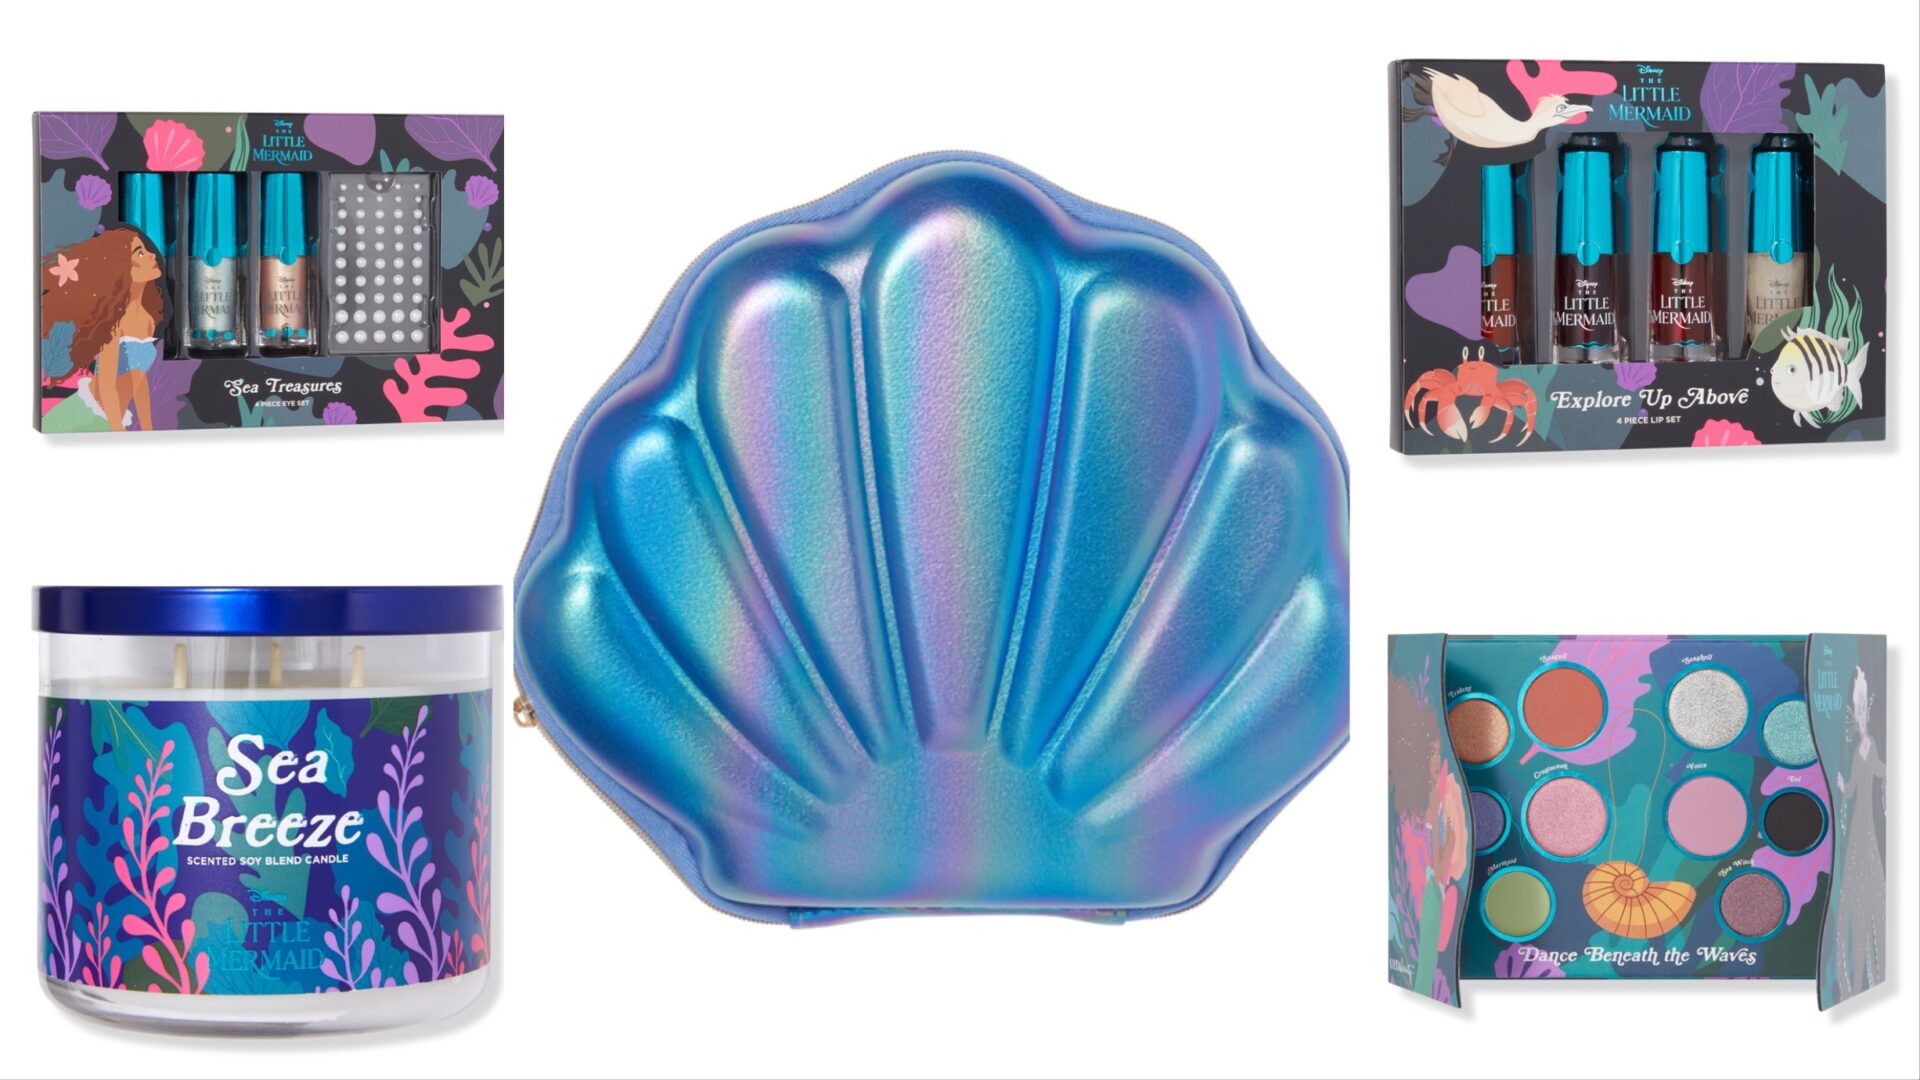 New Little Mermaid Live Action Collection At Ulta Beauty!